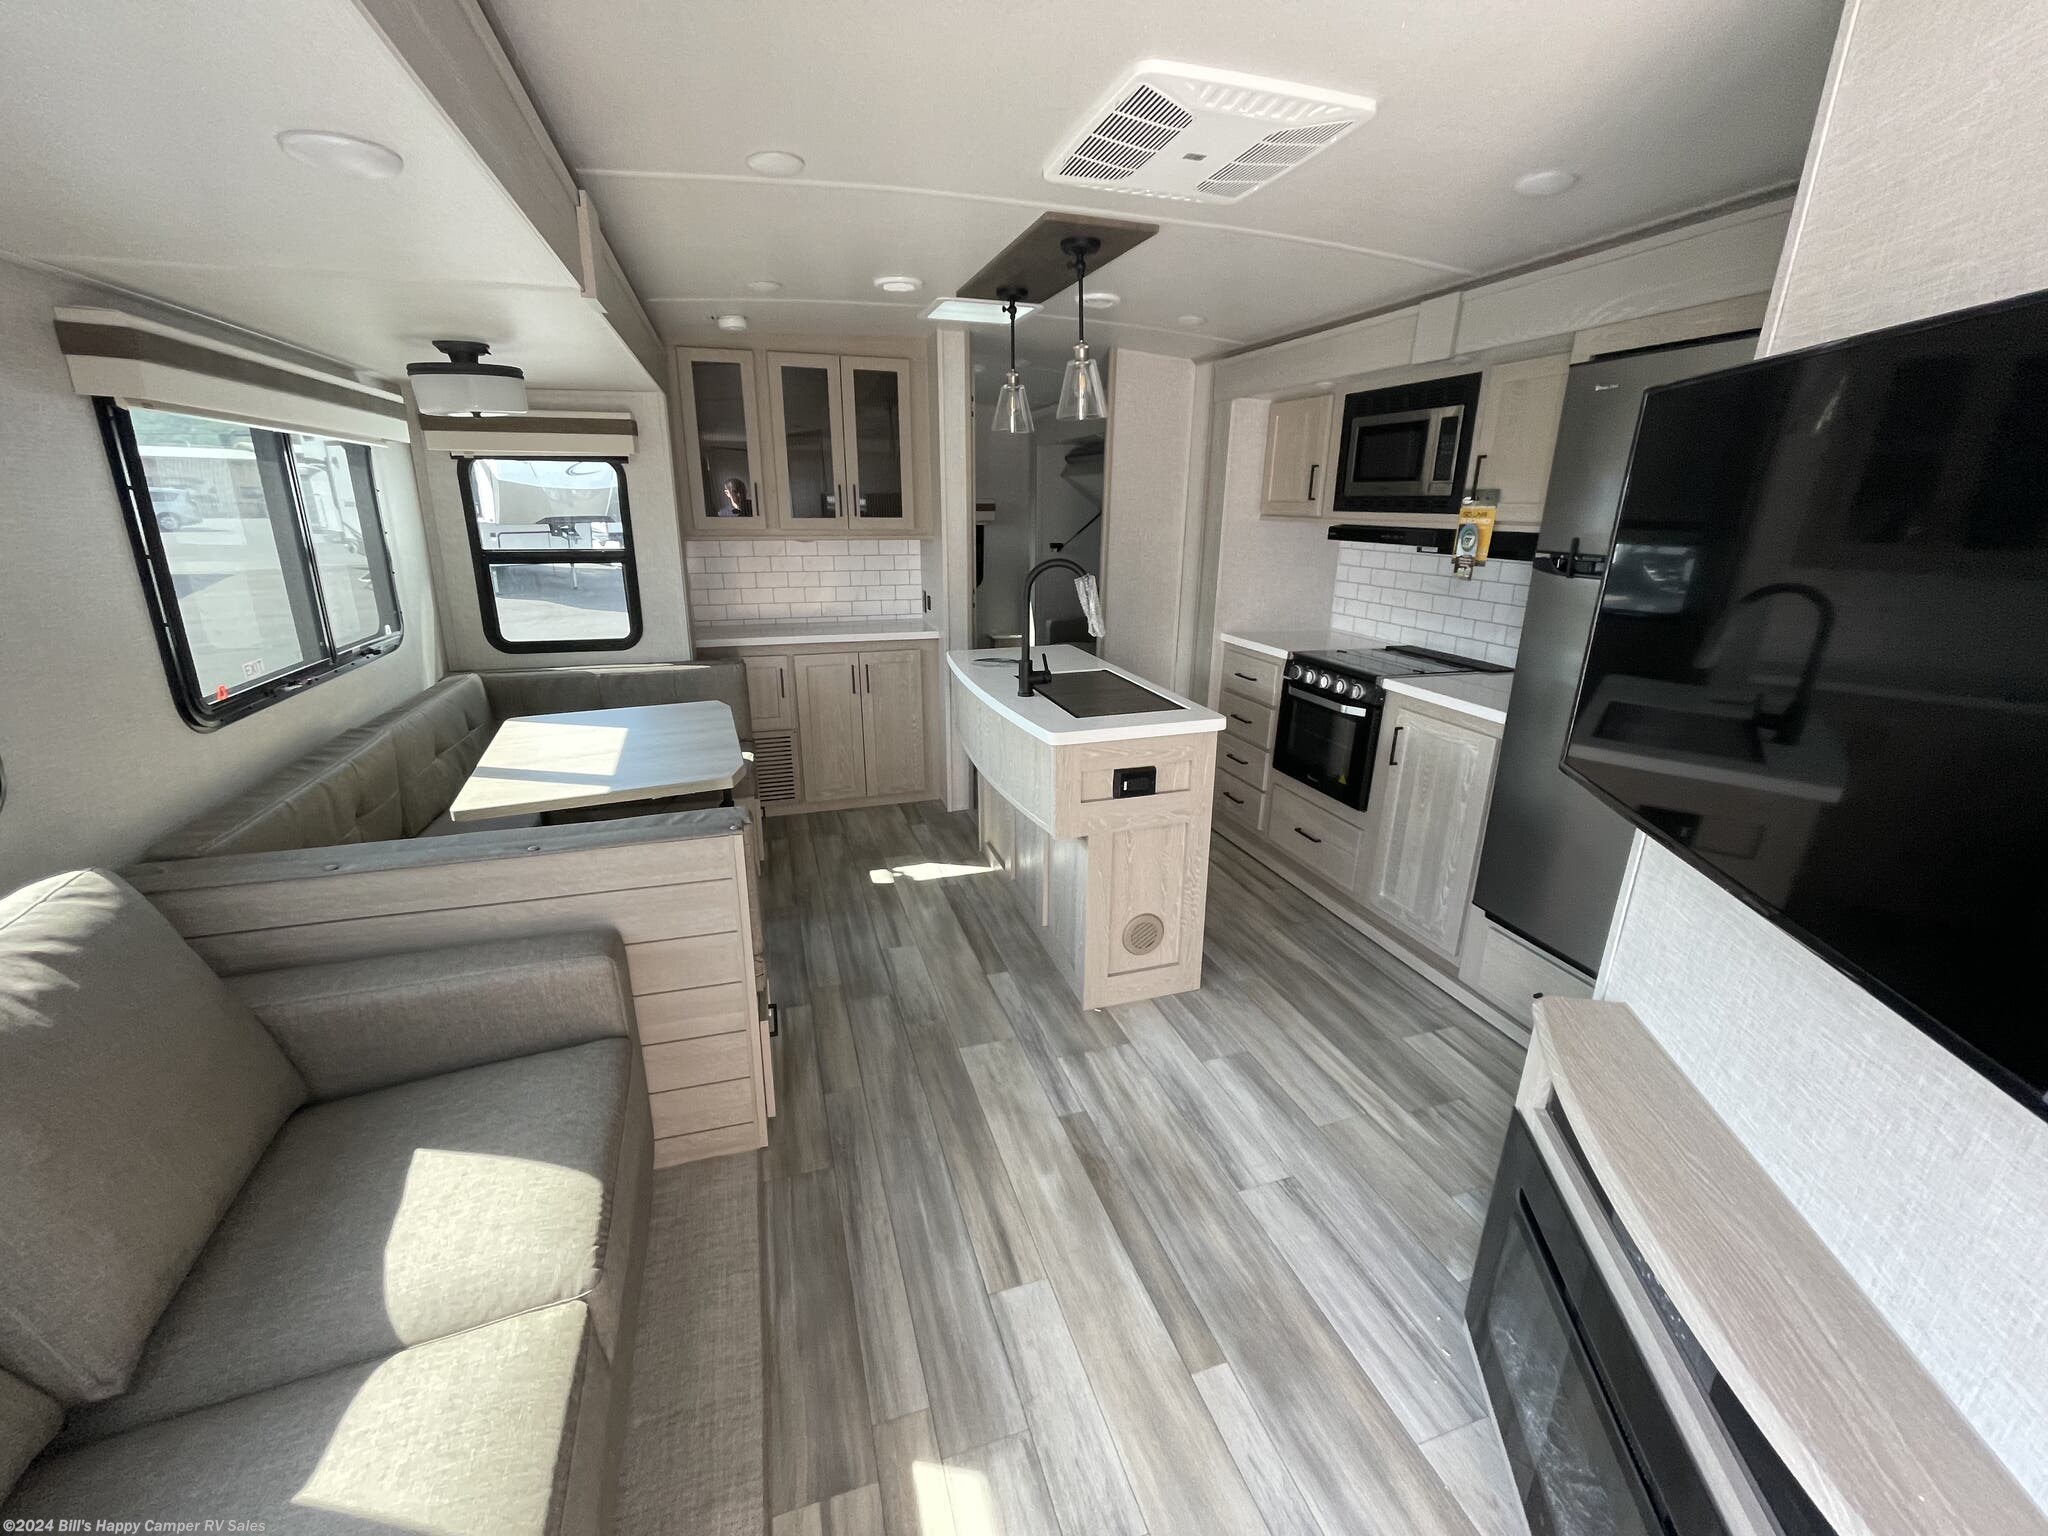 2023 Forest River Rockwood Signature Ultra Lite 8336bh Rv For Sale In